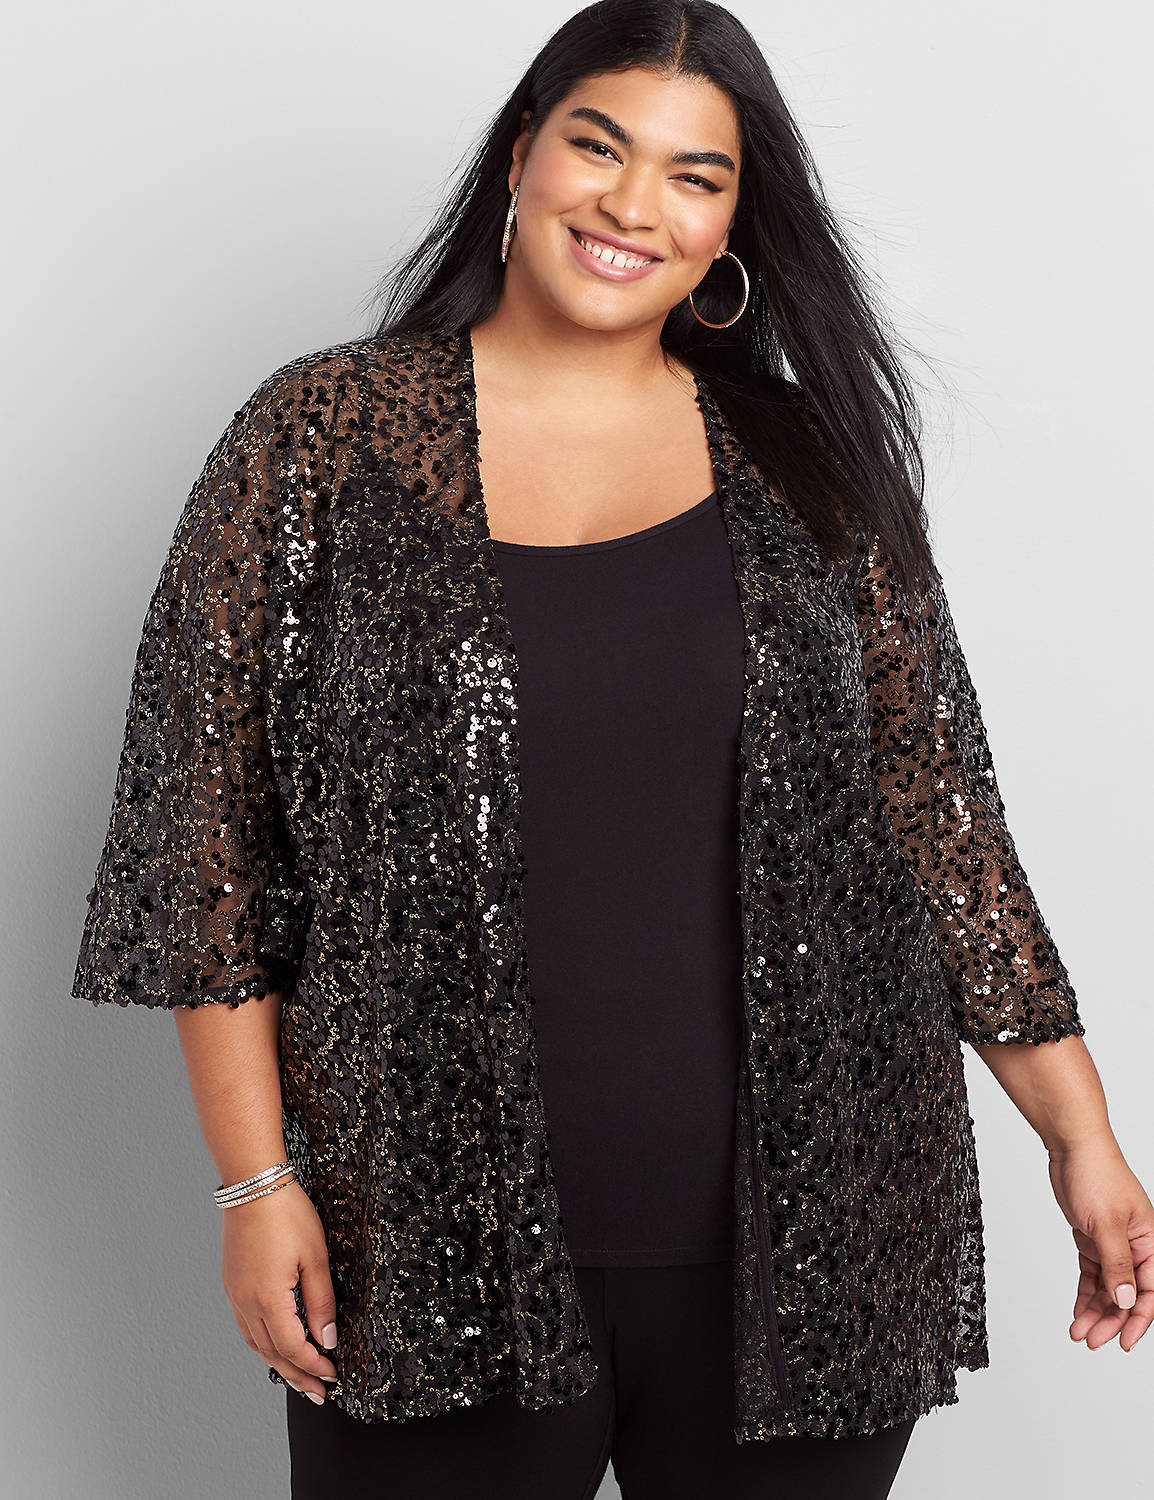 Outlet 3/4 Sleeve Sequin Kimono Over Piece 1117391:Silver W/BlackSequins- As Hanger:10/12 Product Image 1